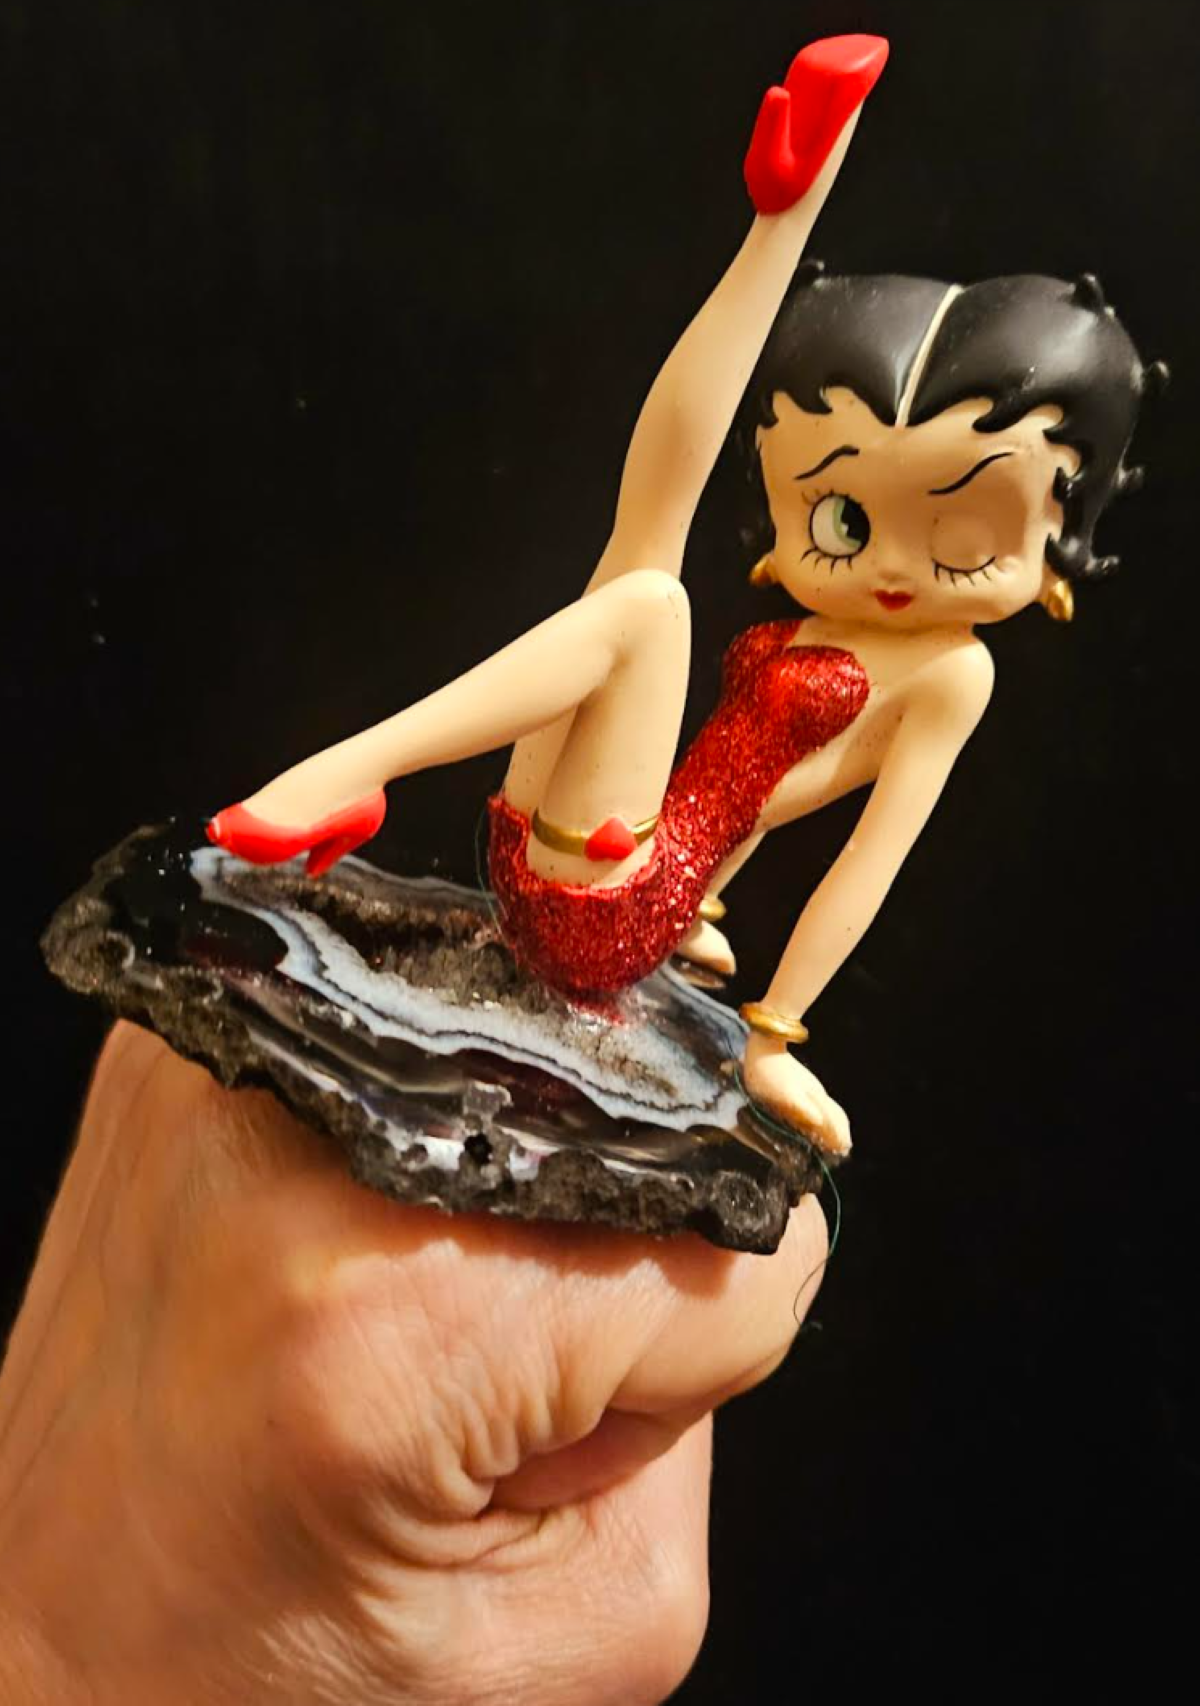 Betty Boop Strike a Pose Adjustable Hand Ring - Whimsical Femme Fatale Doll Statement Ring -  Avant Garde Female Cartoon Figurine Finger Candy - Kat Kouture Jewelry